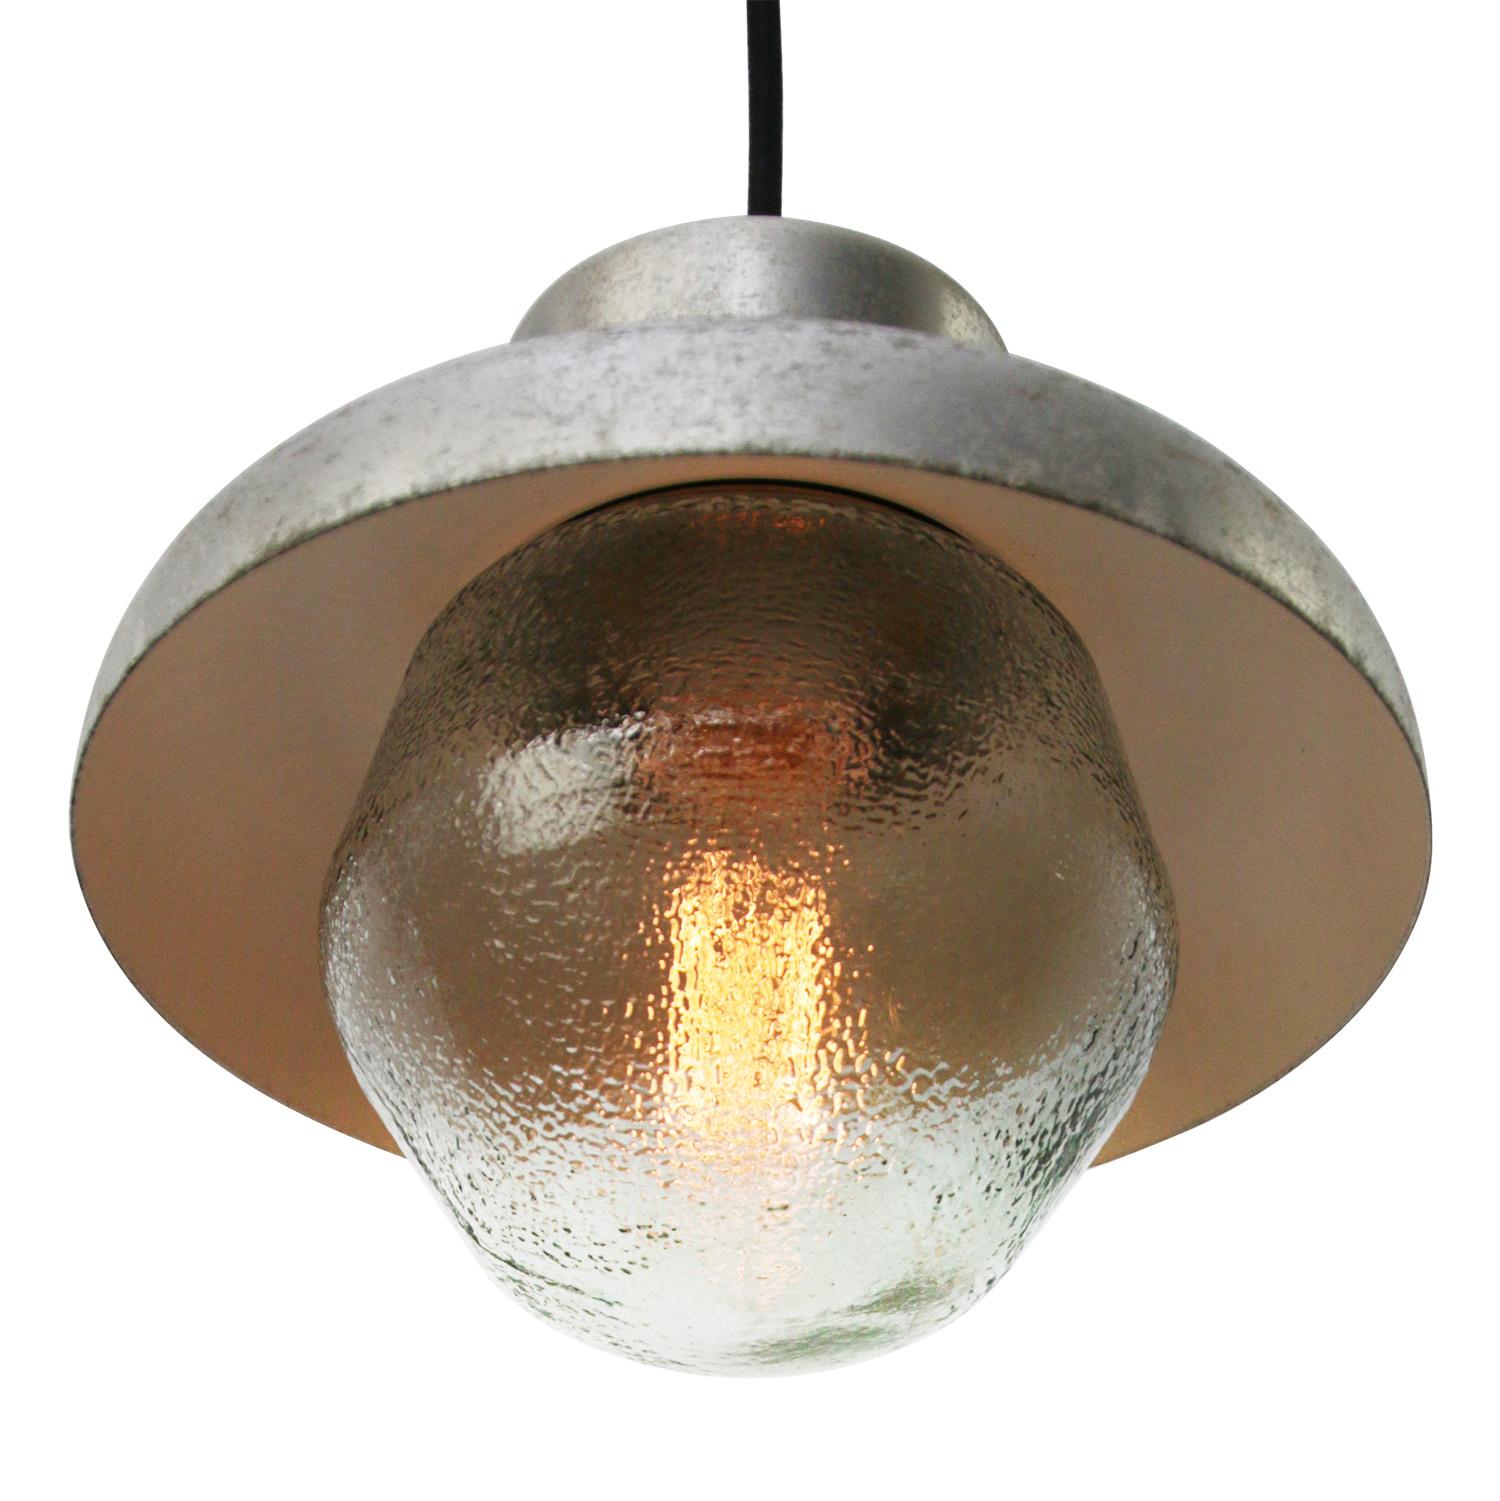 Factory hanging lamp
Grey metal top with frosted glass

weight 1.20 kg / 2.6 lb

Priced per individual item. All lamps have been made suitable by international standards for incandescent light bulbs, energy-efficient and LED bulbs. E26/E27 bulb